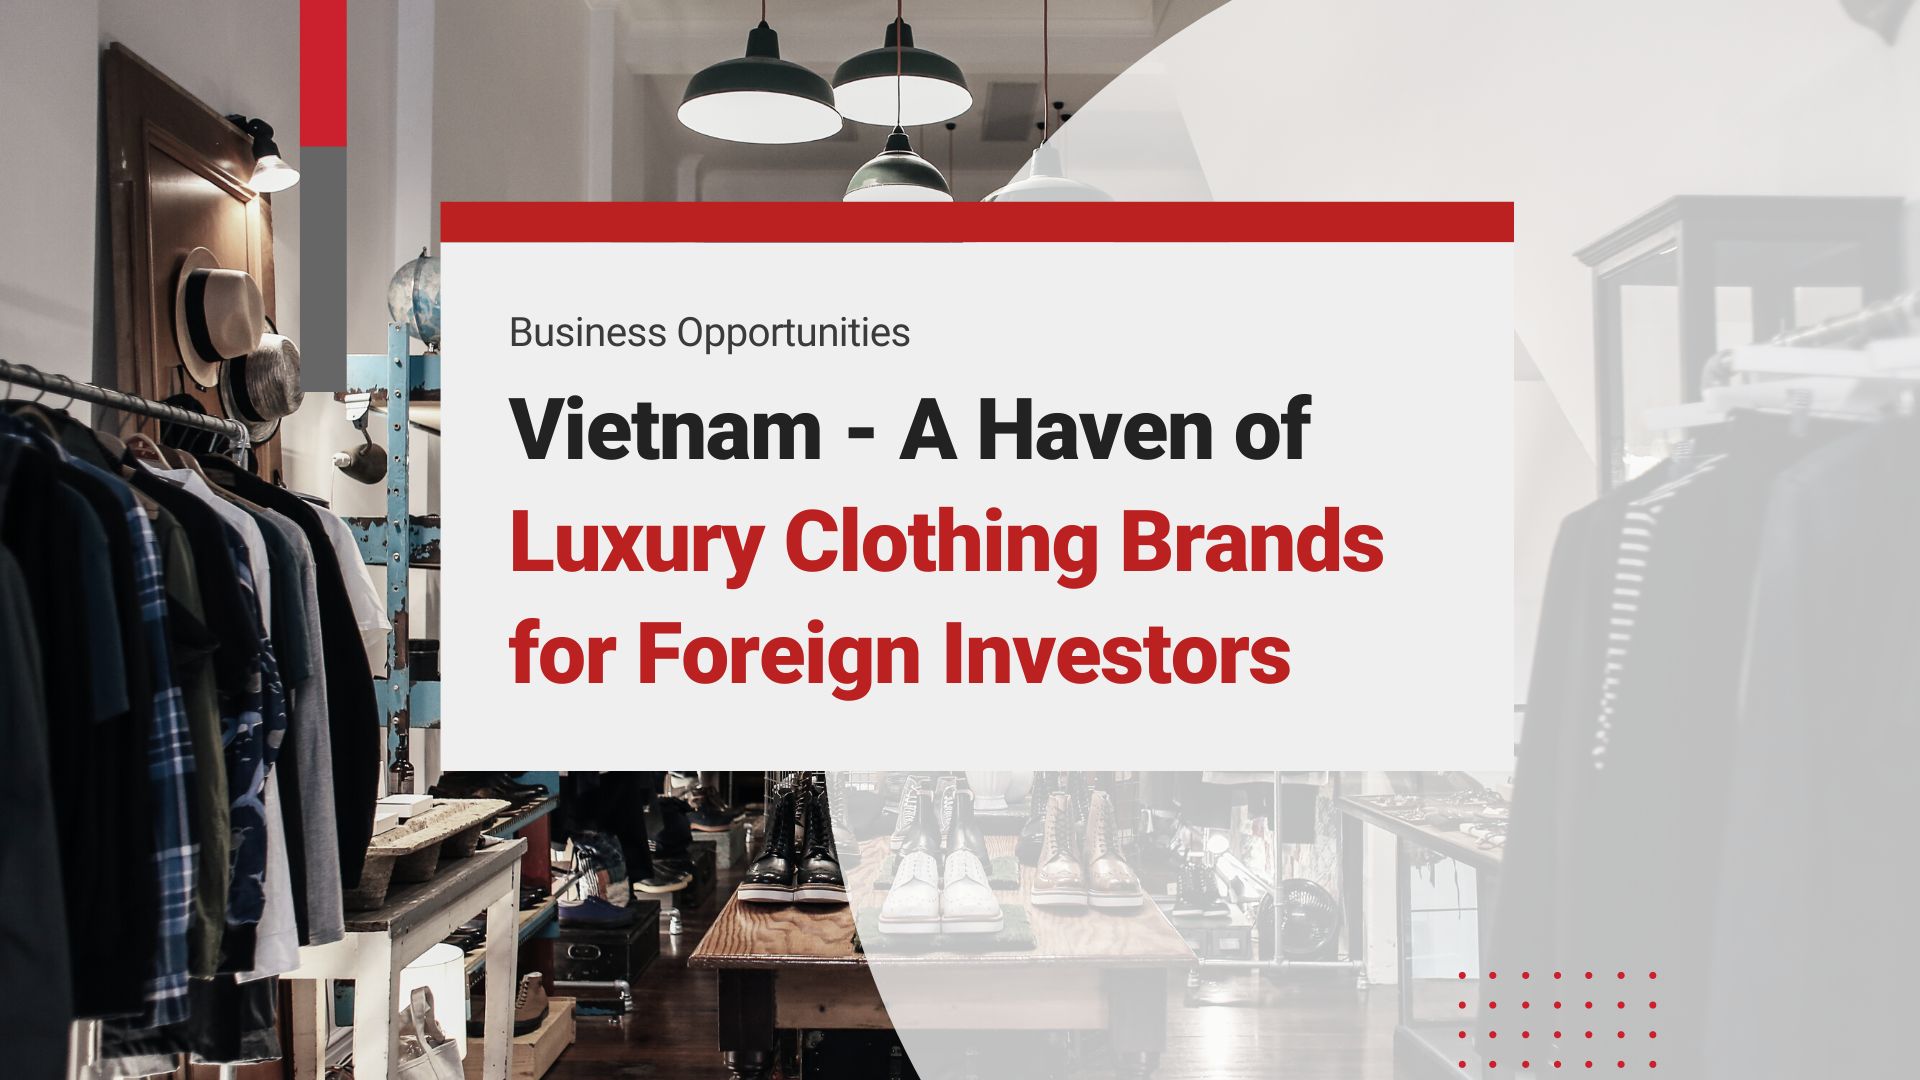 Vietnam - A Haven of Luxury Clothing Brands for Foreign Investors